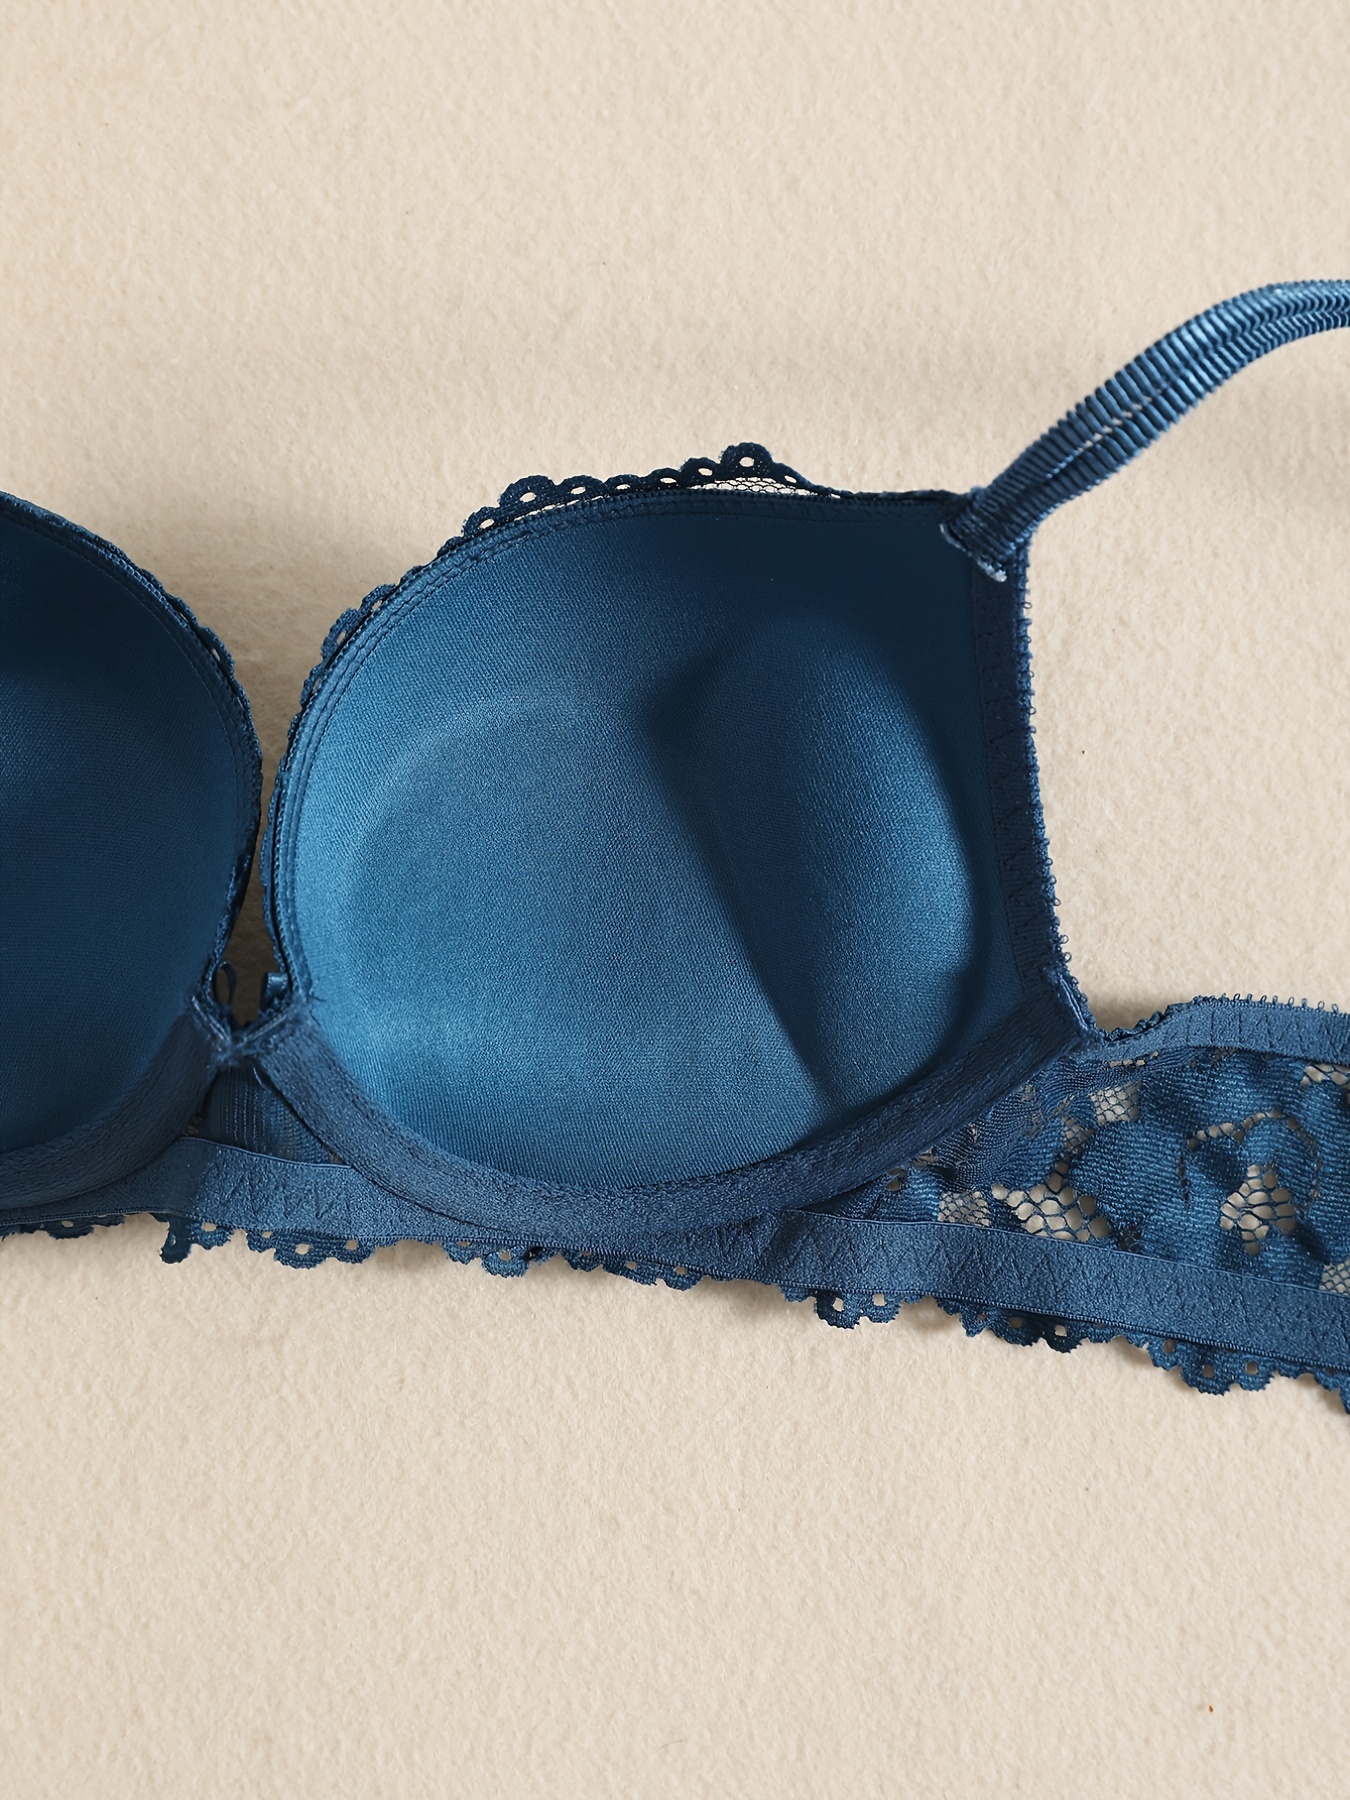 Bras N Things Bra Push Up Navy Blue Gold Embroidered Underwire